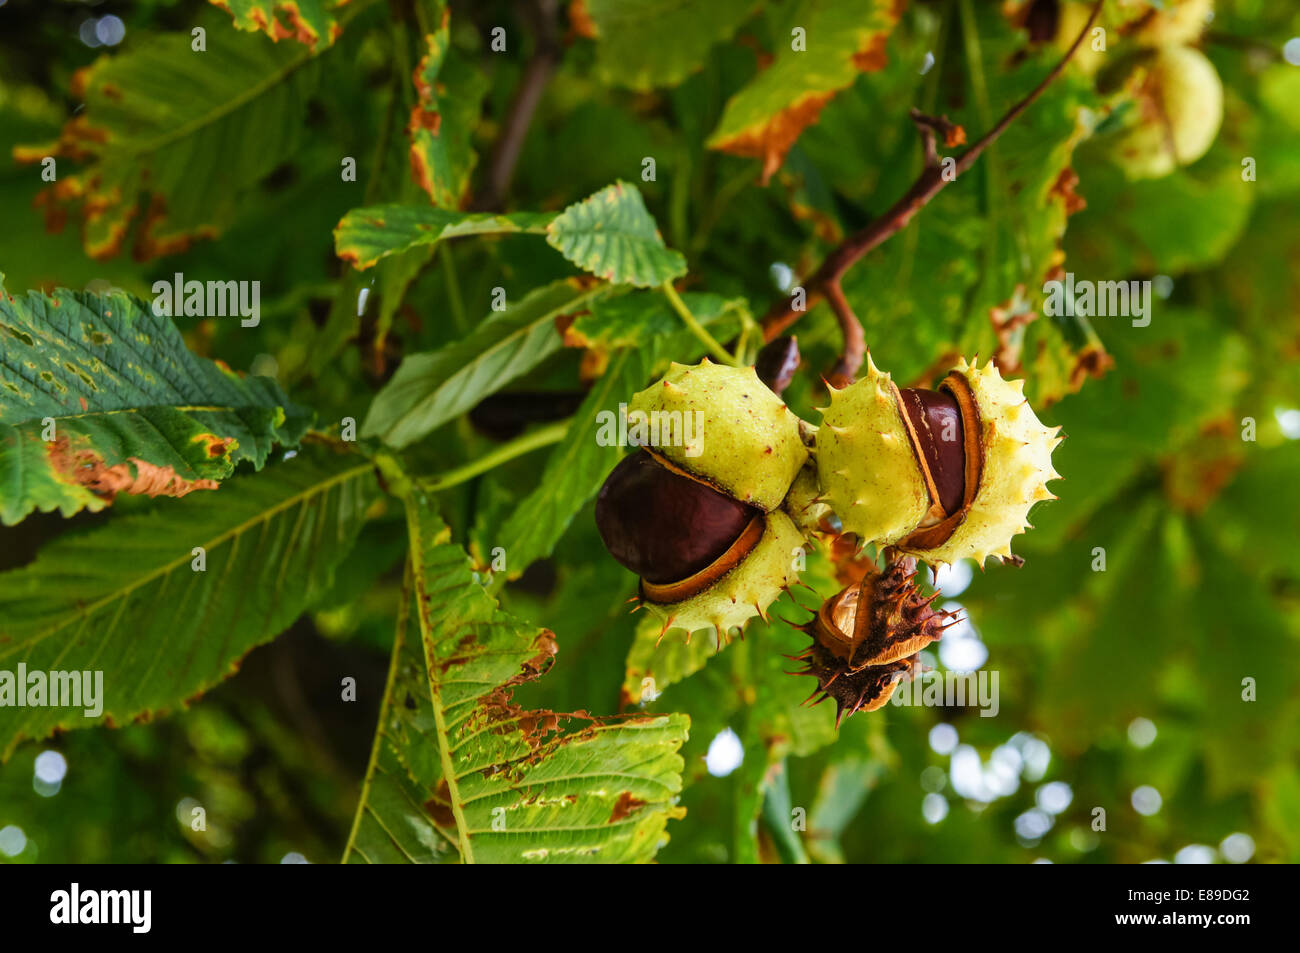 Conkers on a horse chestnut tree Stock Photo